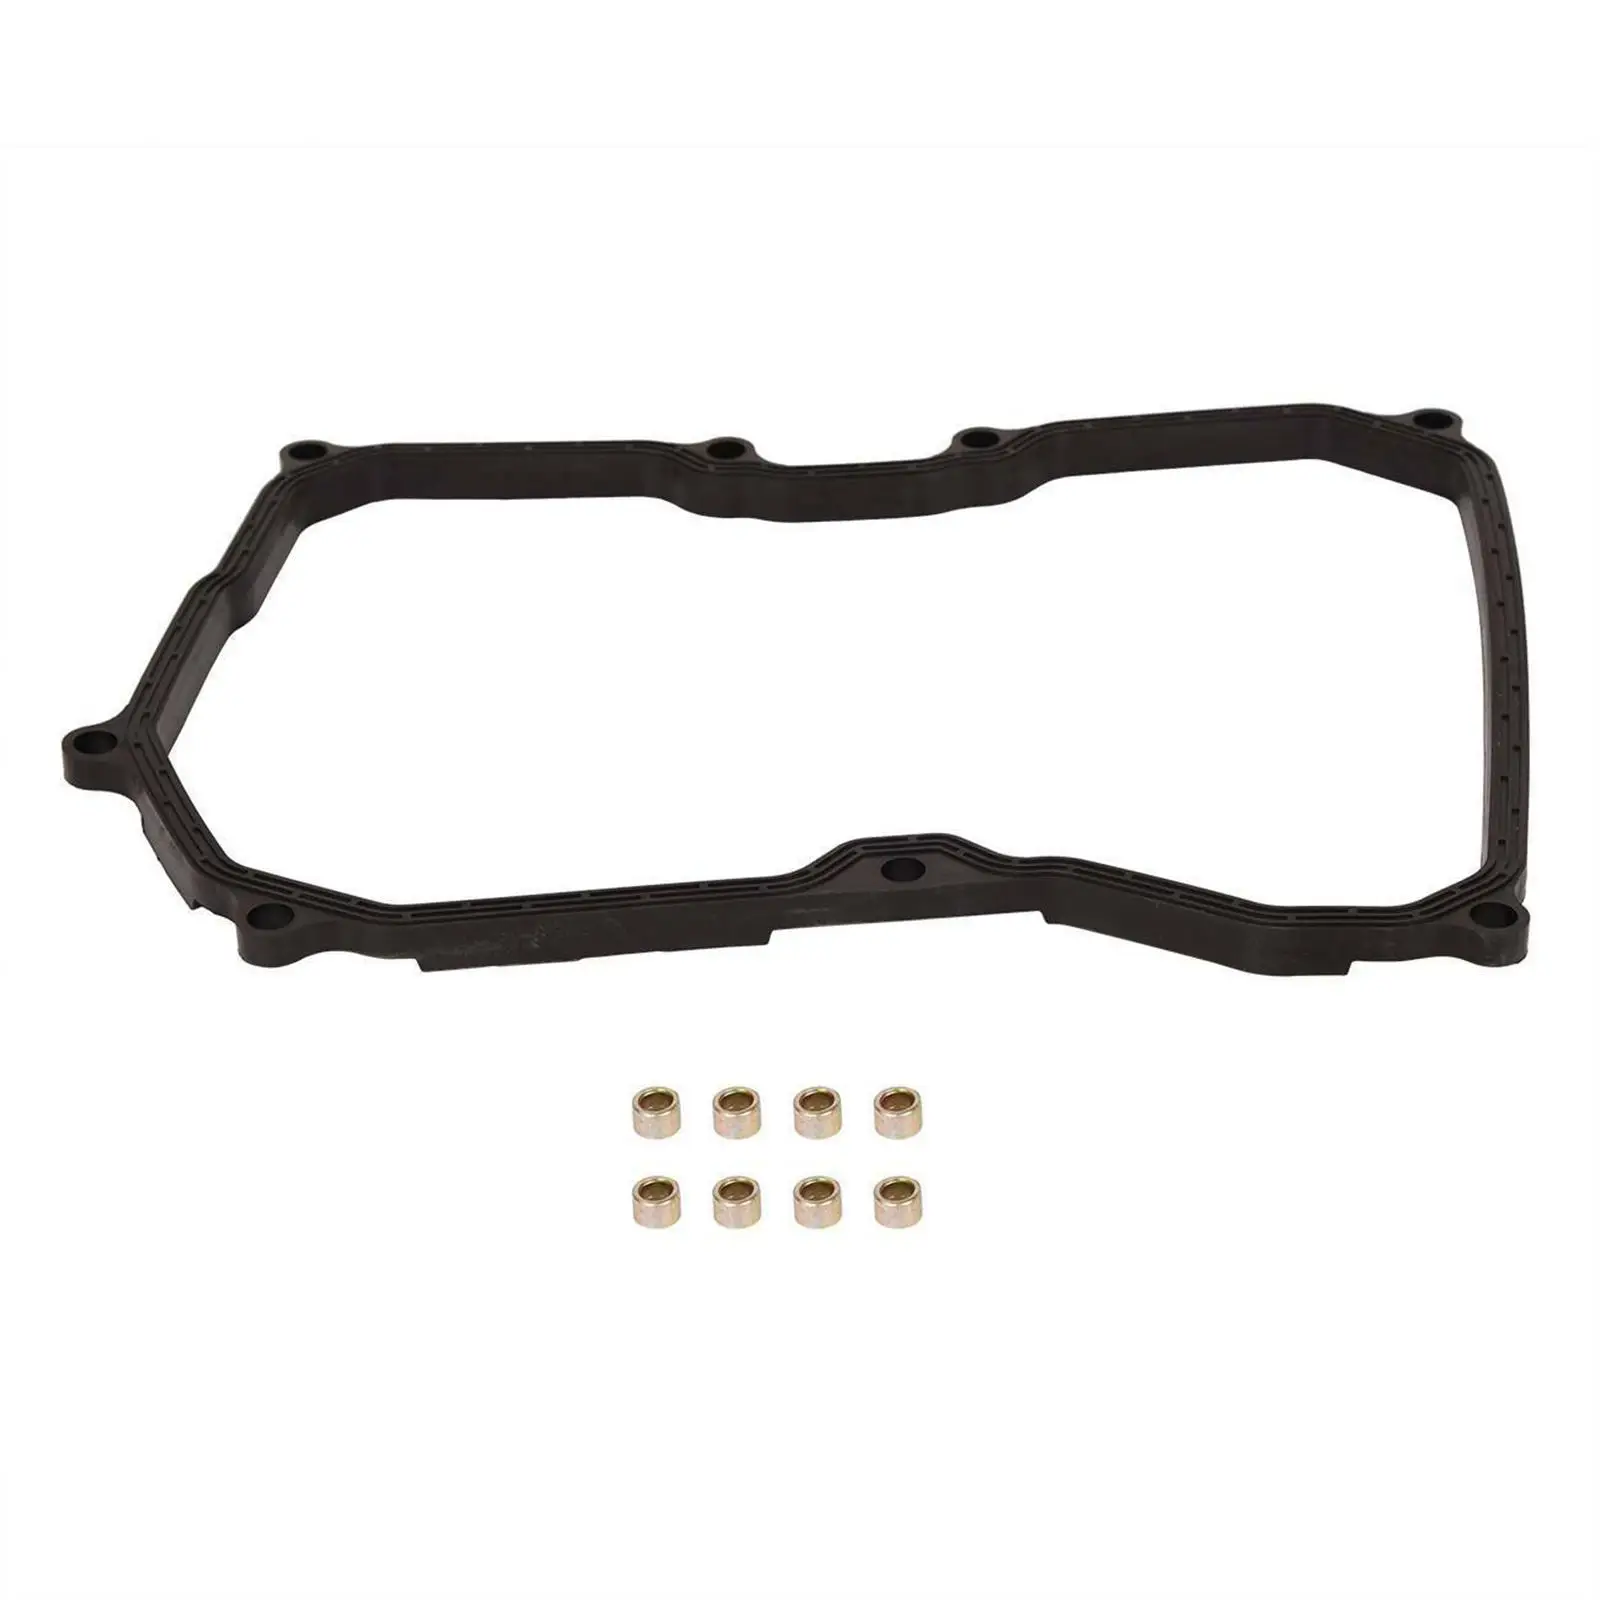 Transmission Pan Gasket Lightweight Fits for Mini 2007+ Accessories Replace